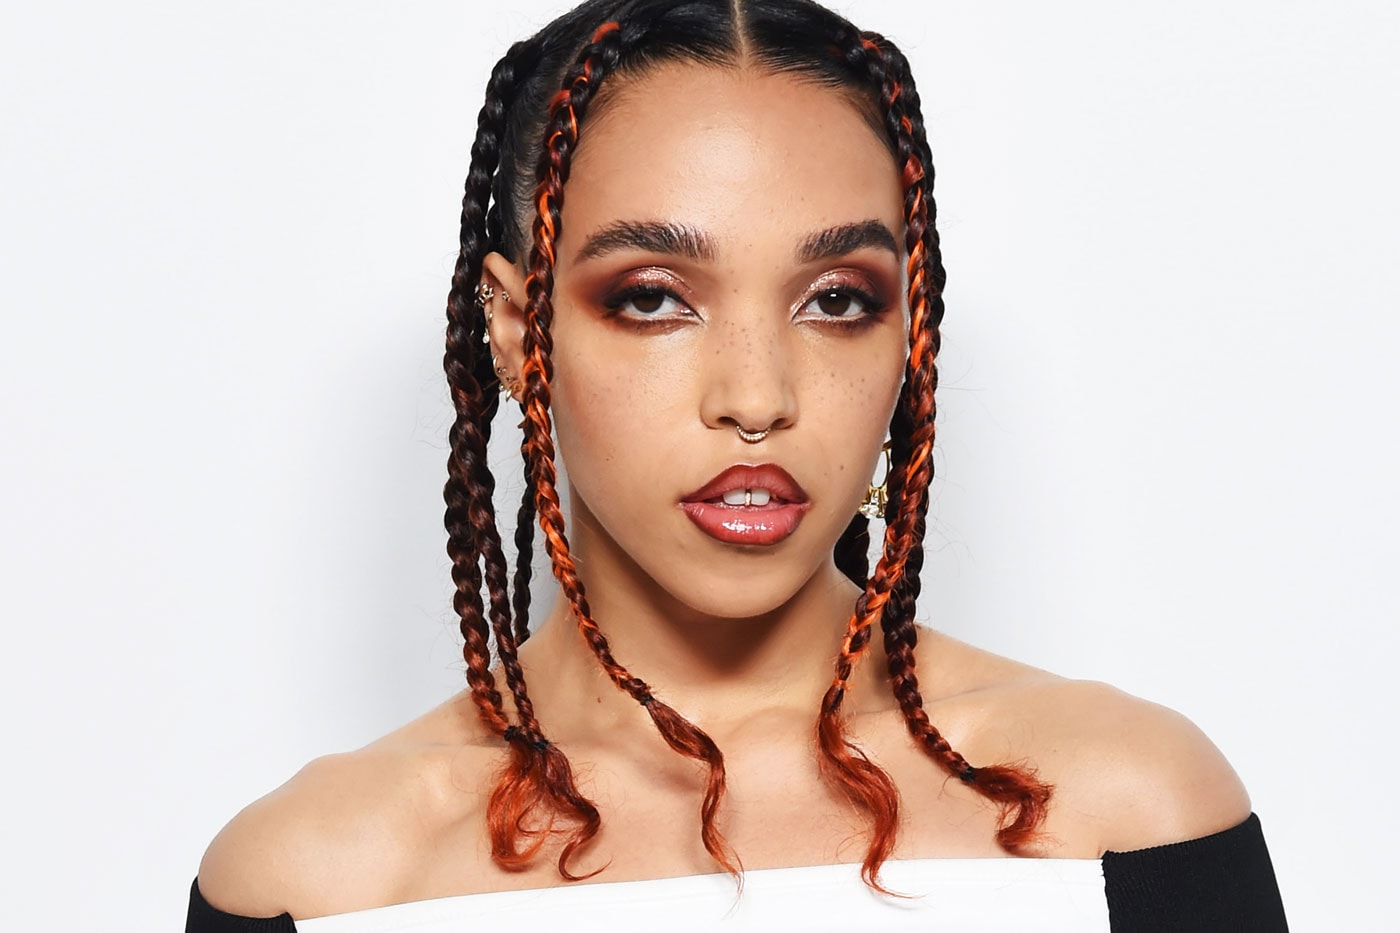 FKA twigs Covers Latest Issue of PAPER Magazine